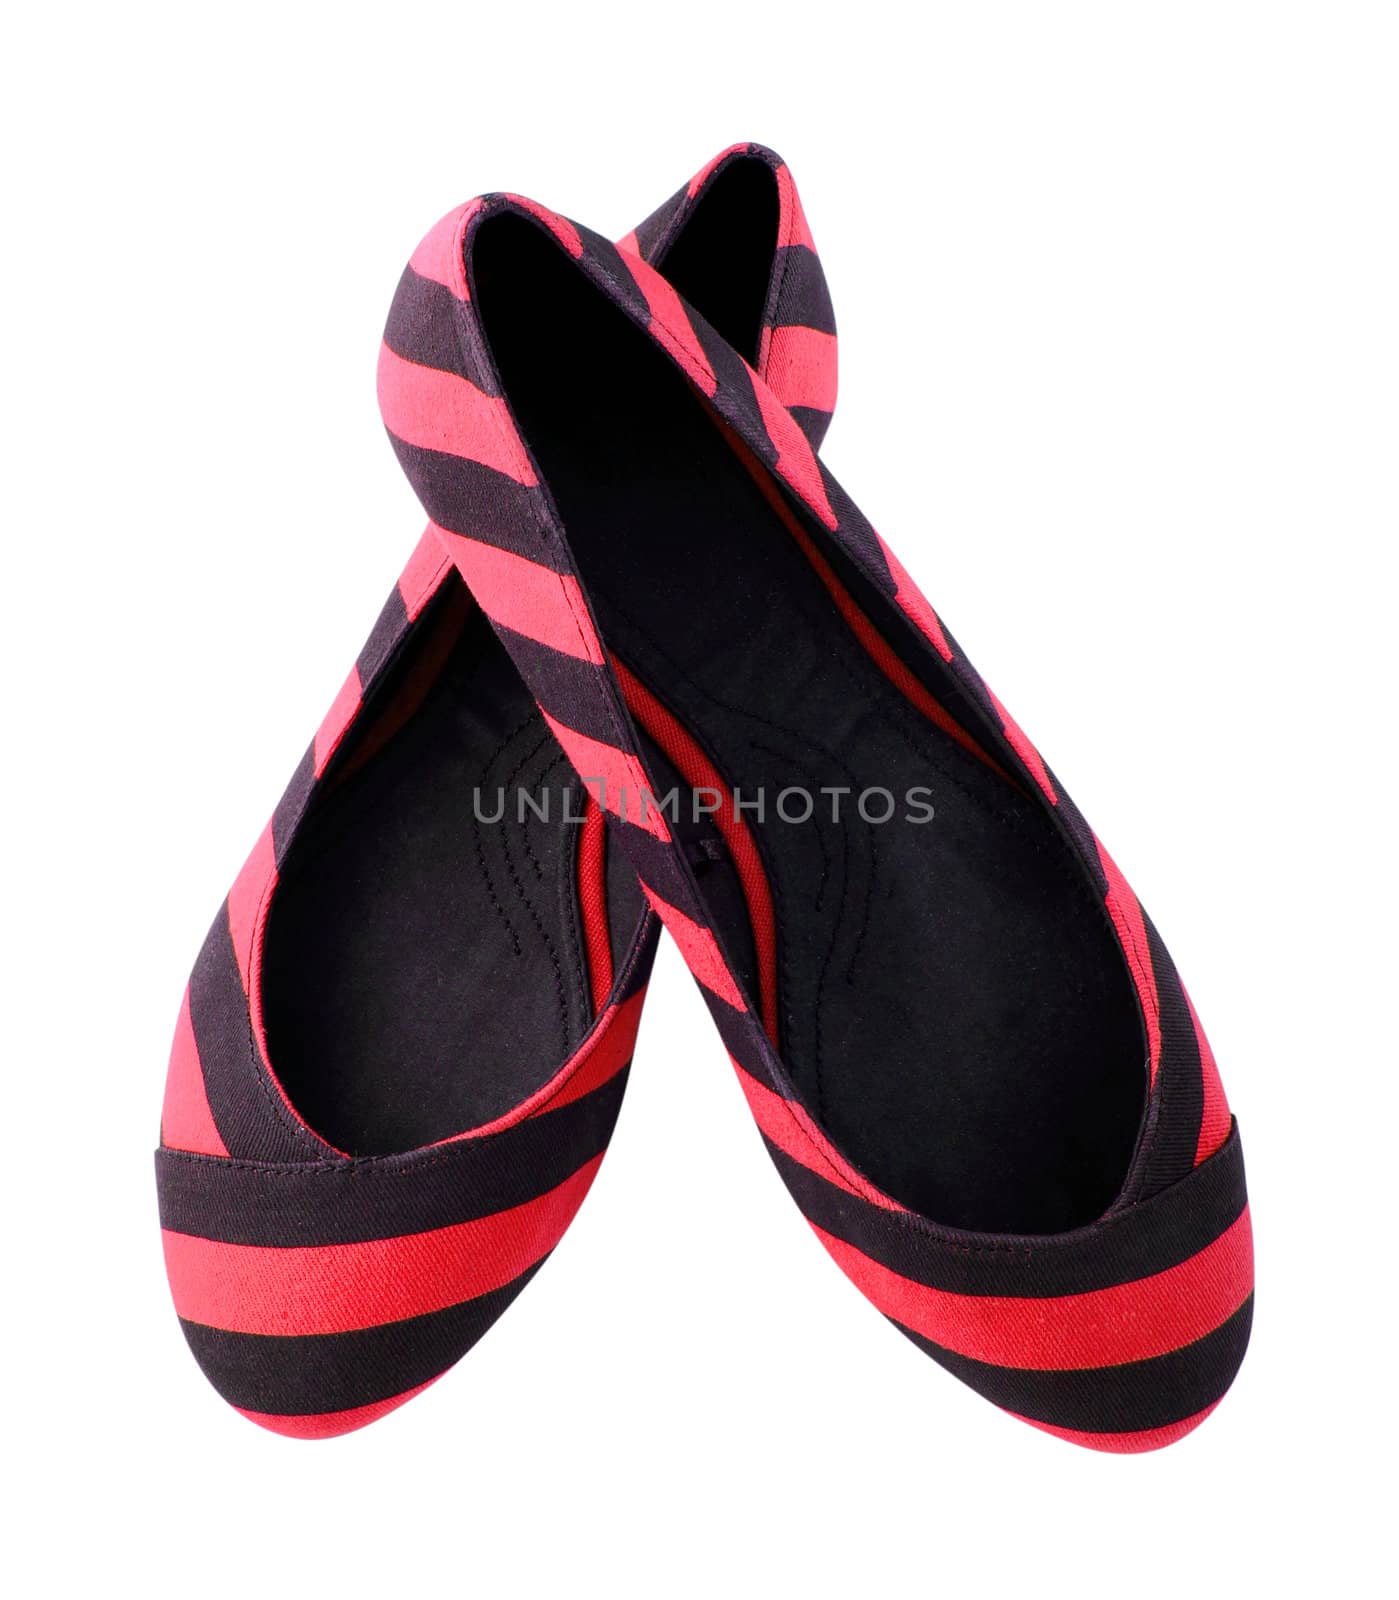 Red striped shoes for woman isolated on white background 